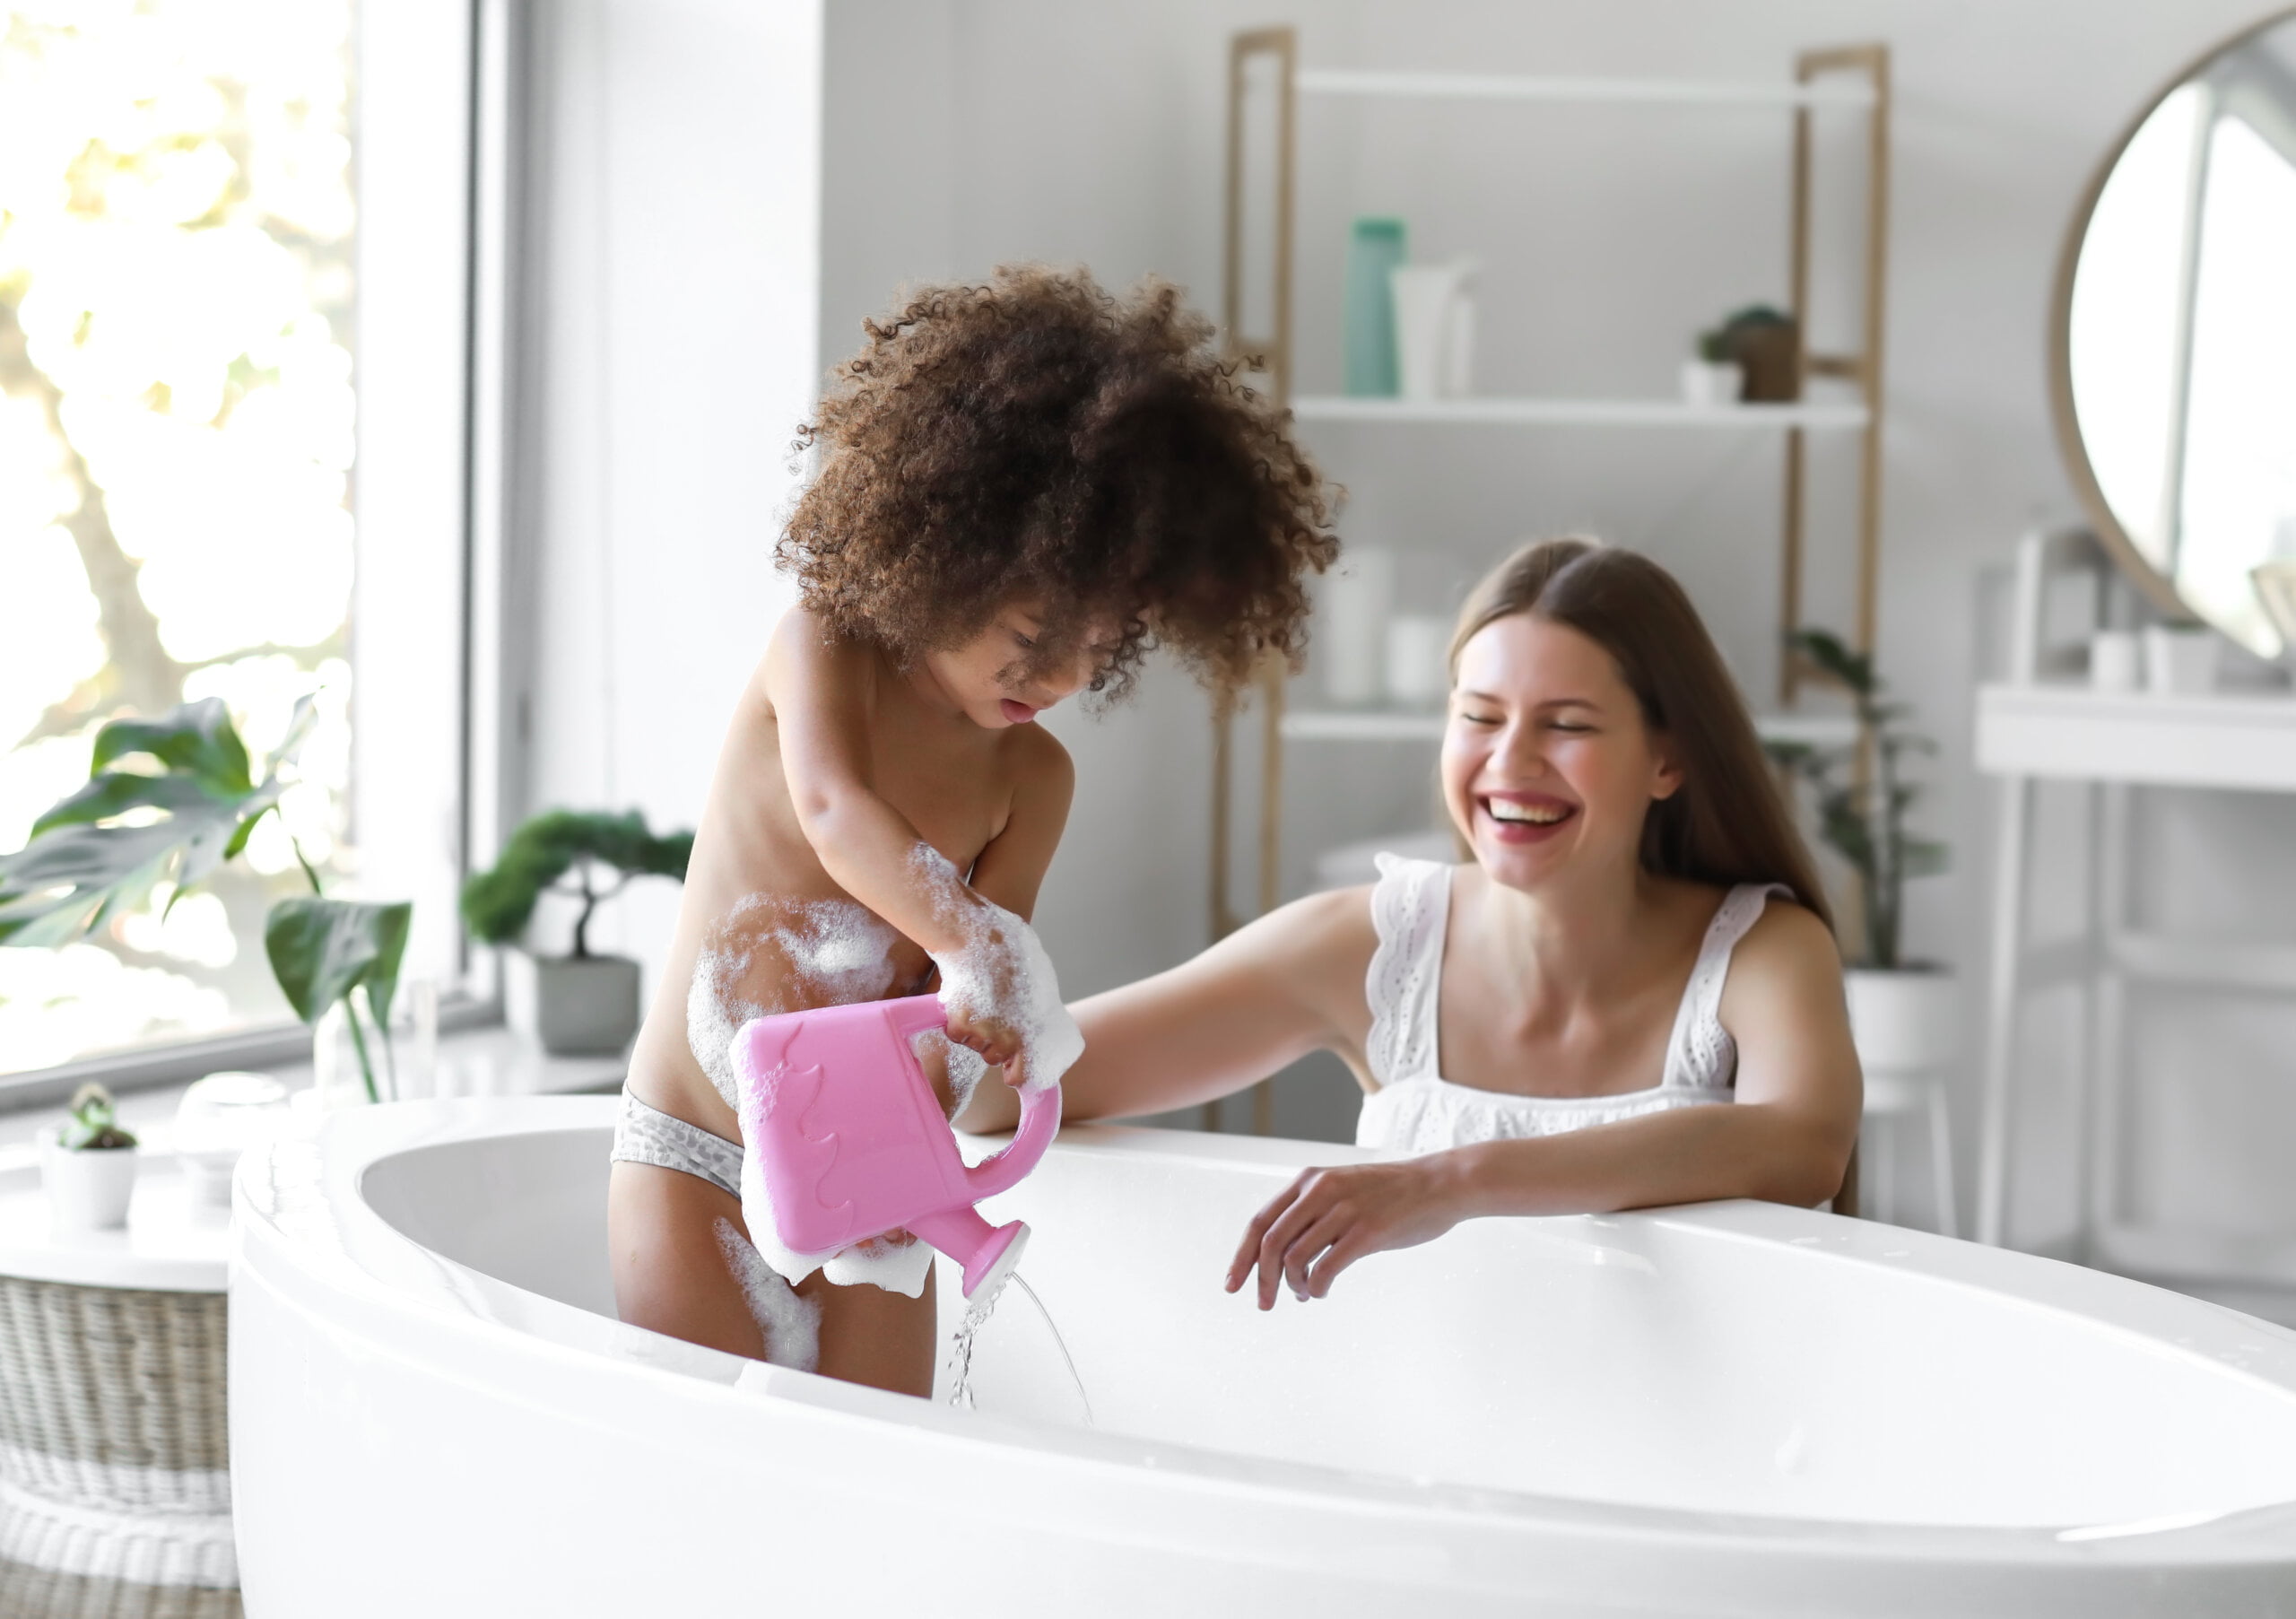 bath toys for toddlers that don't mold